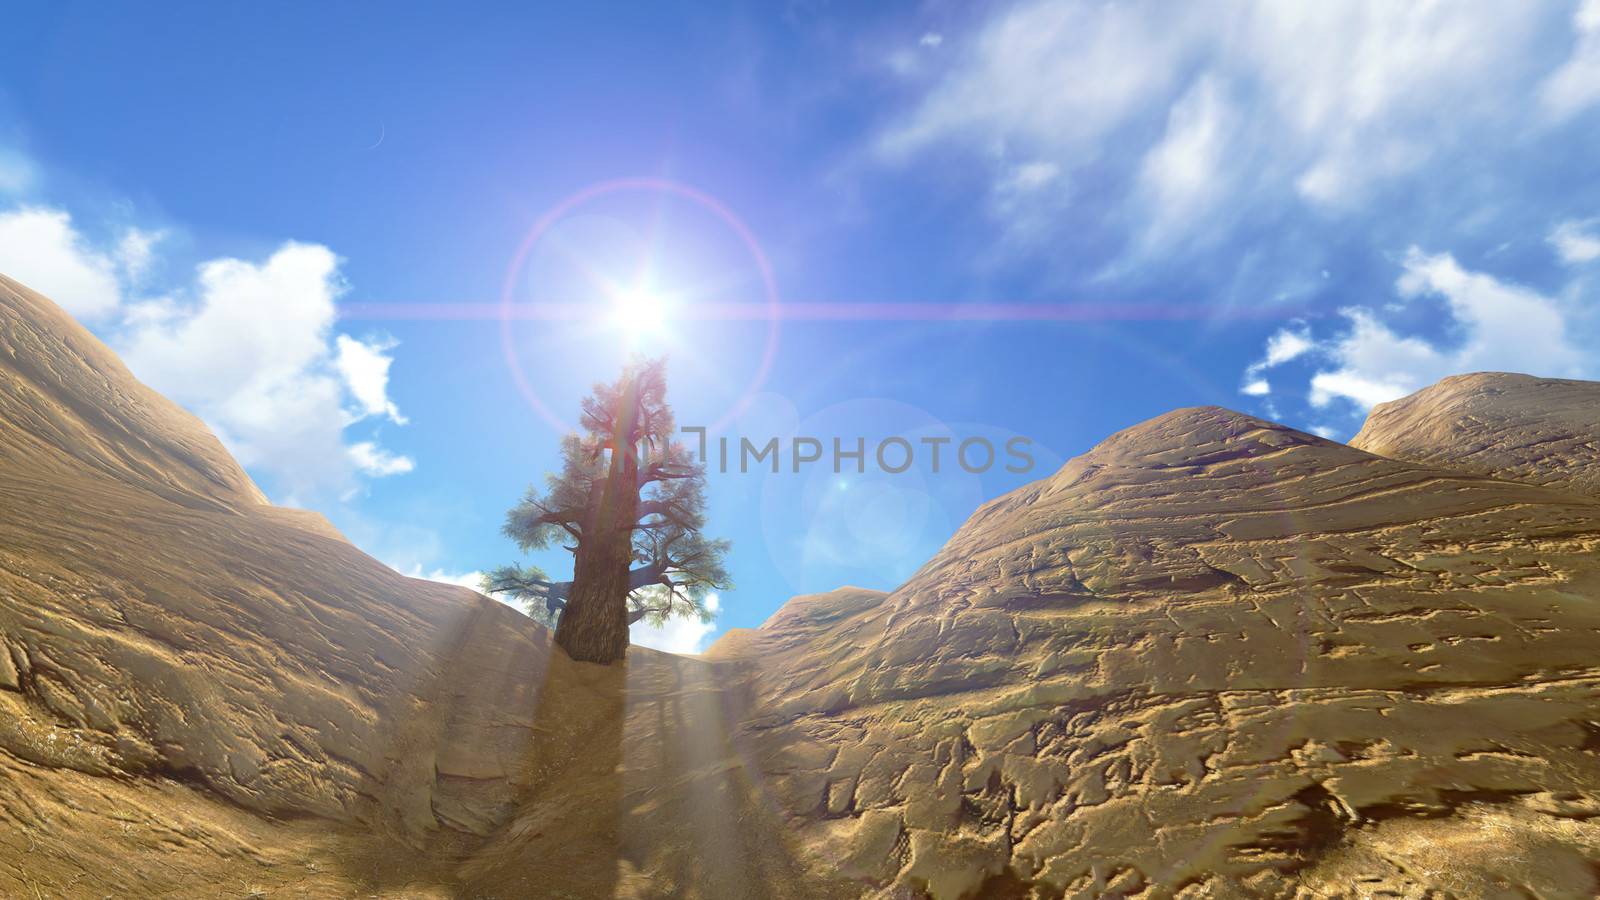 A tree at Grand canyon national park on the blue sky by apichart